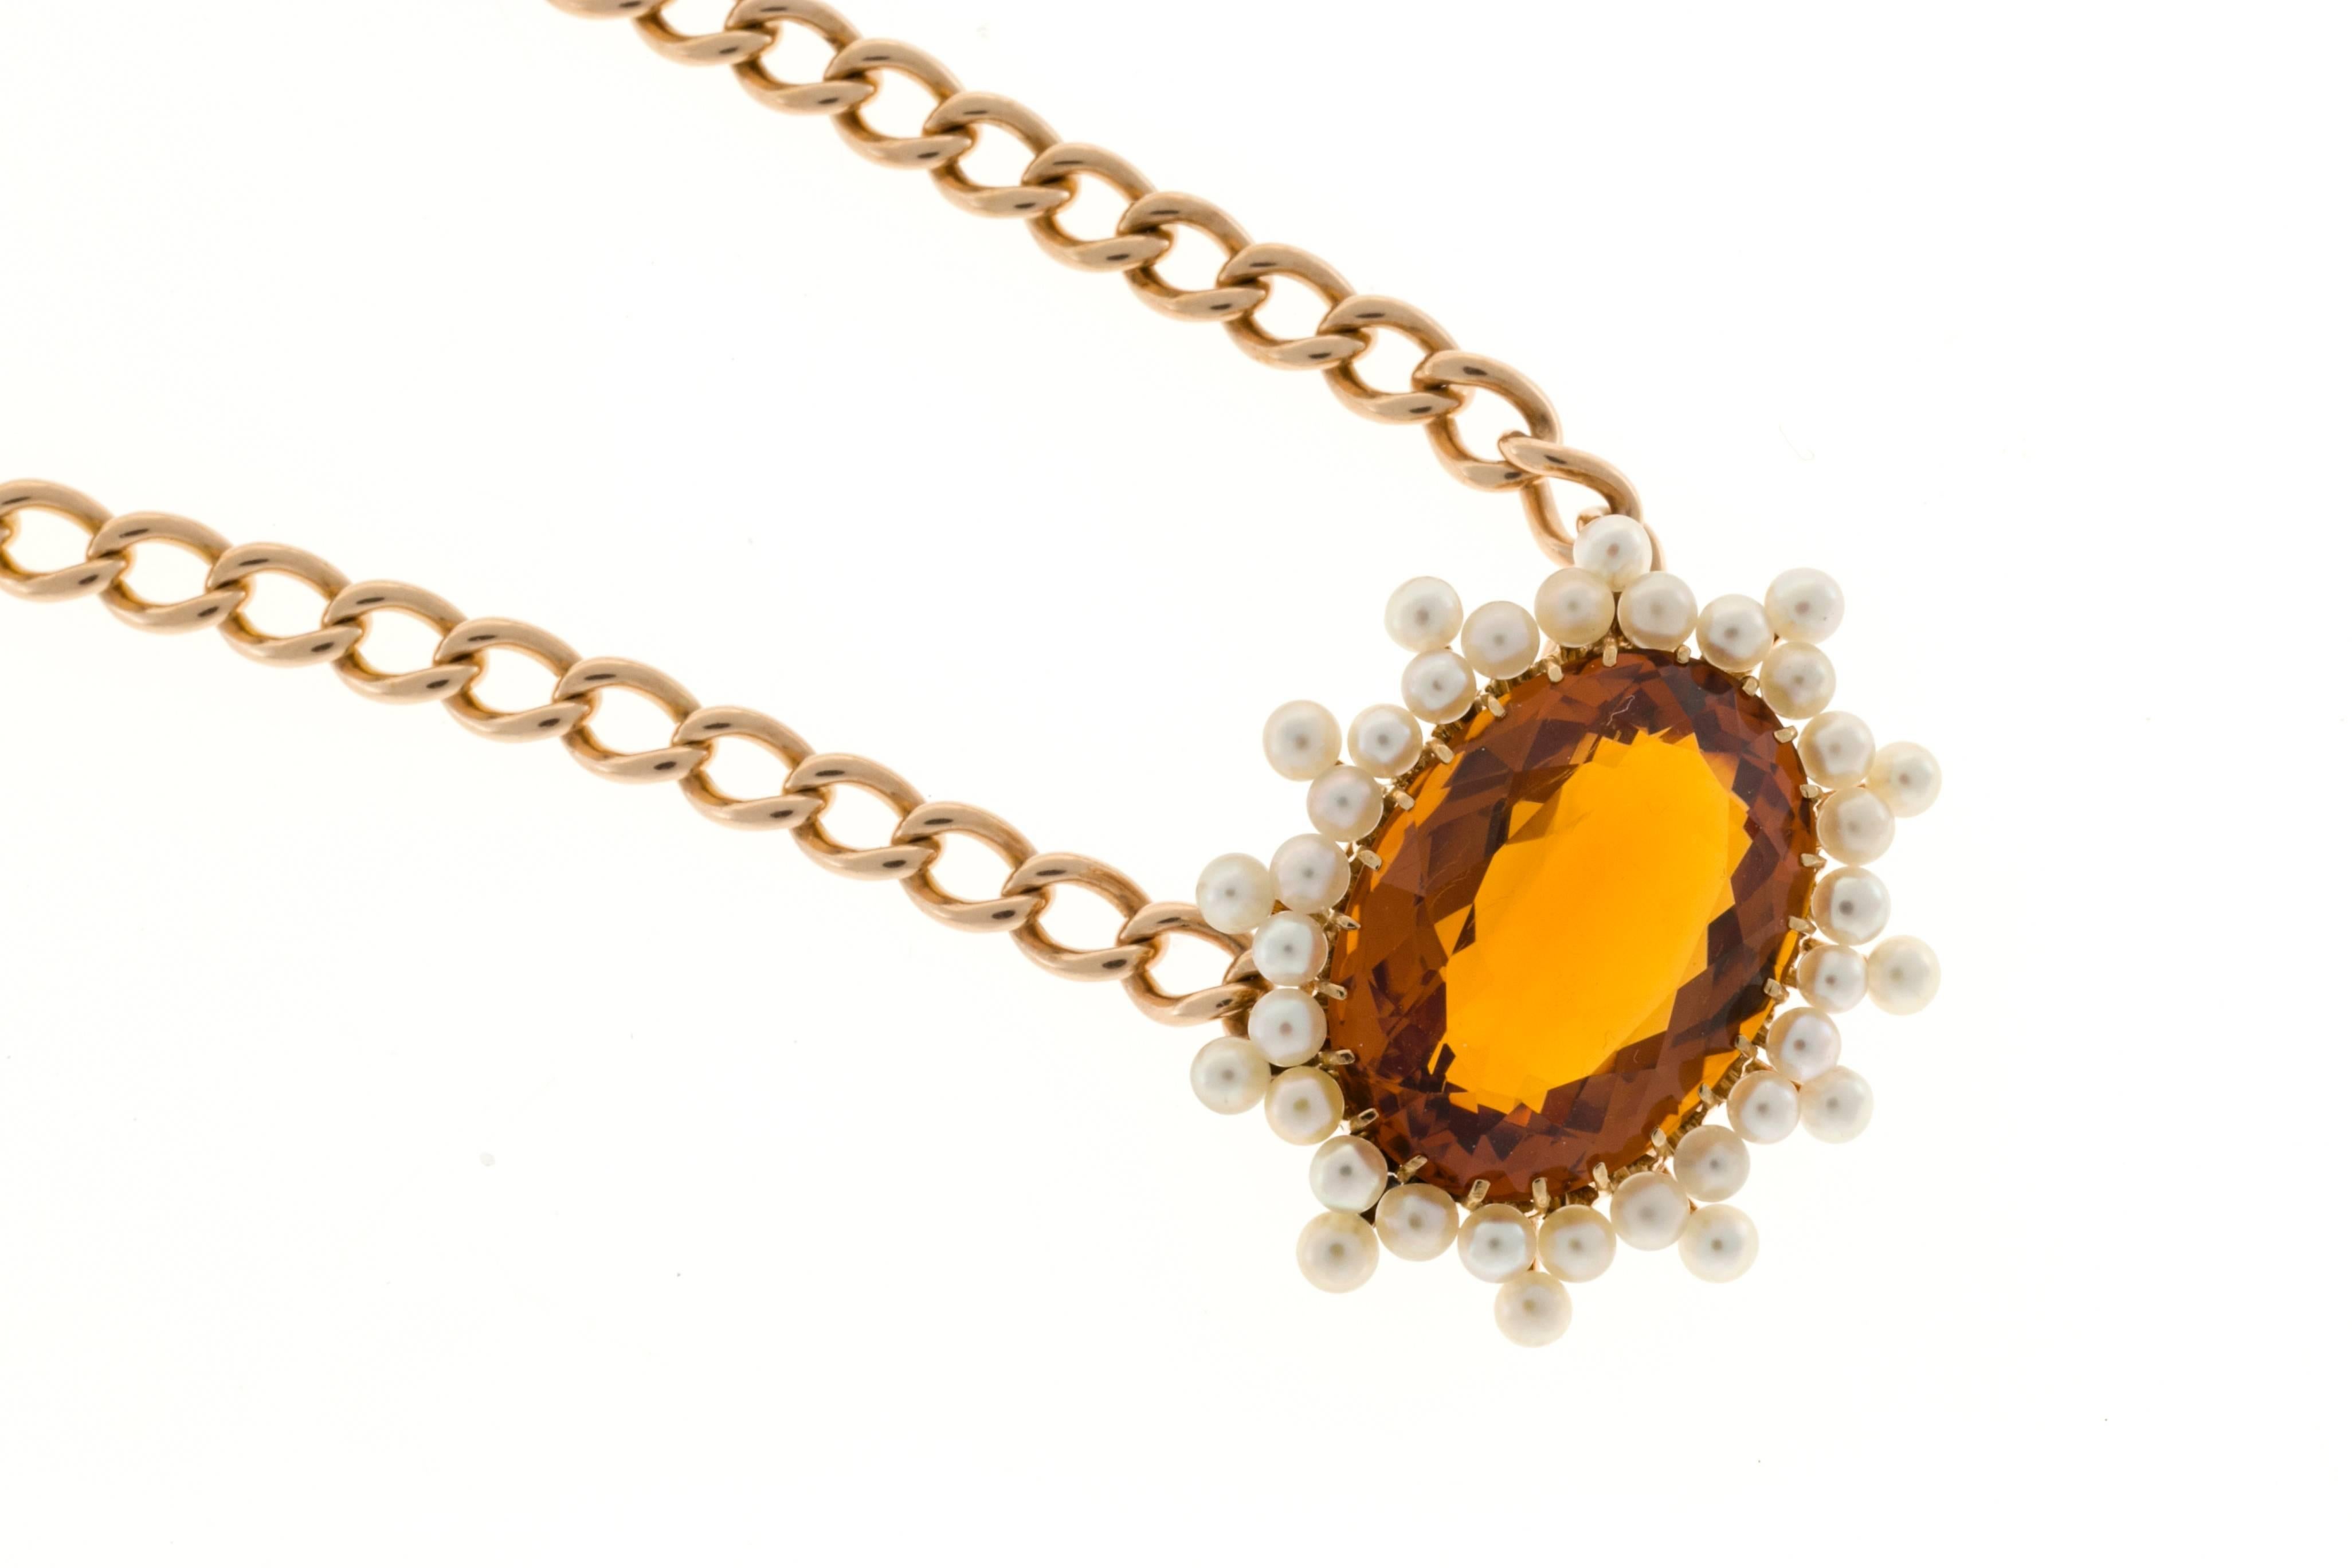 Handmade pink gold chain and wire pendant with fine pearls and incredible natural untreated orangey yellow Citrine. Circa 1900.

Oval genuine orangey Citrine Madera, approx. total weight 11.00cts, 18 x 13.5mm, natural color
38 2.2 to 2.5mm fine